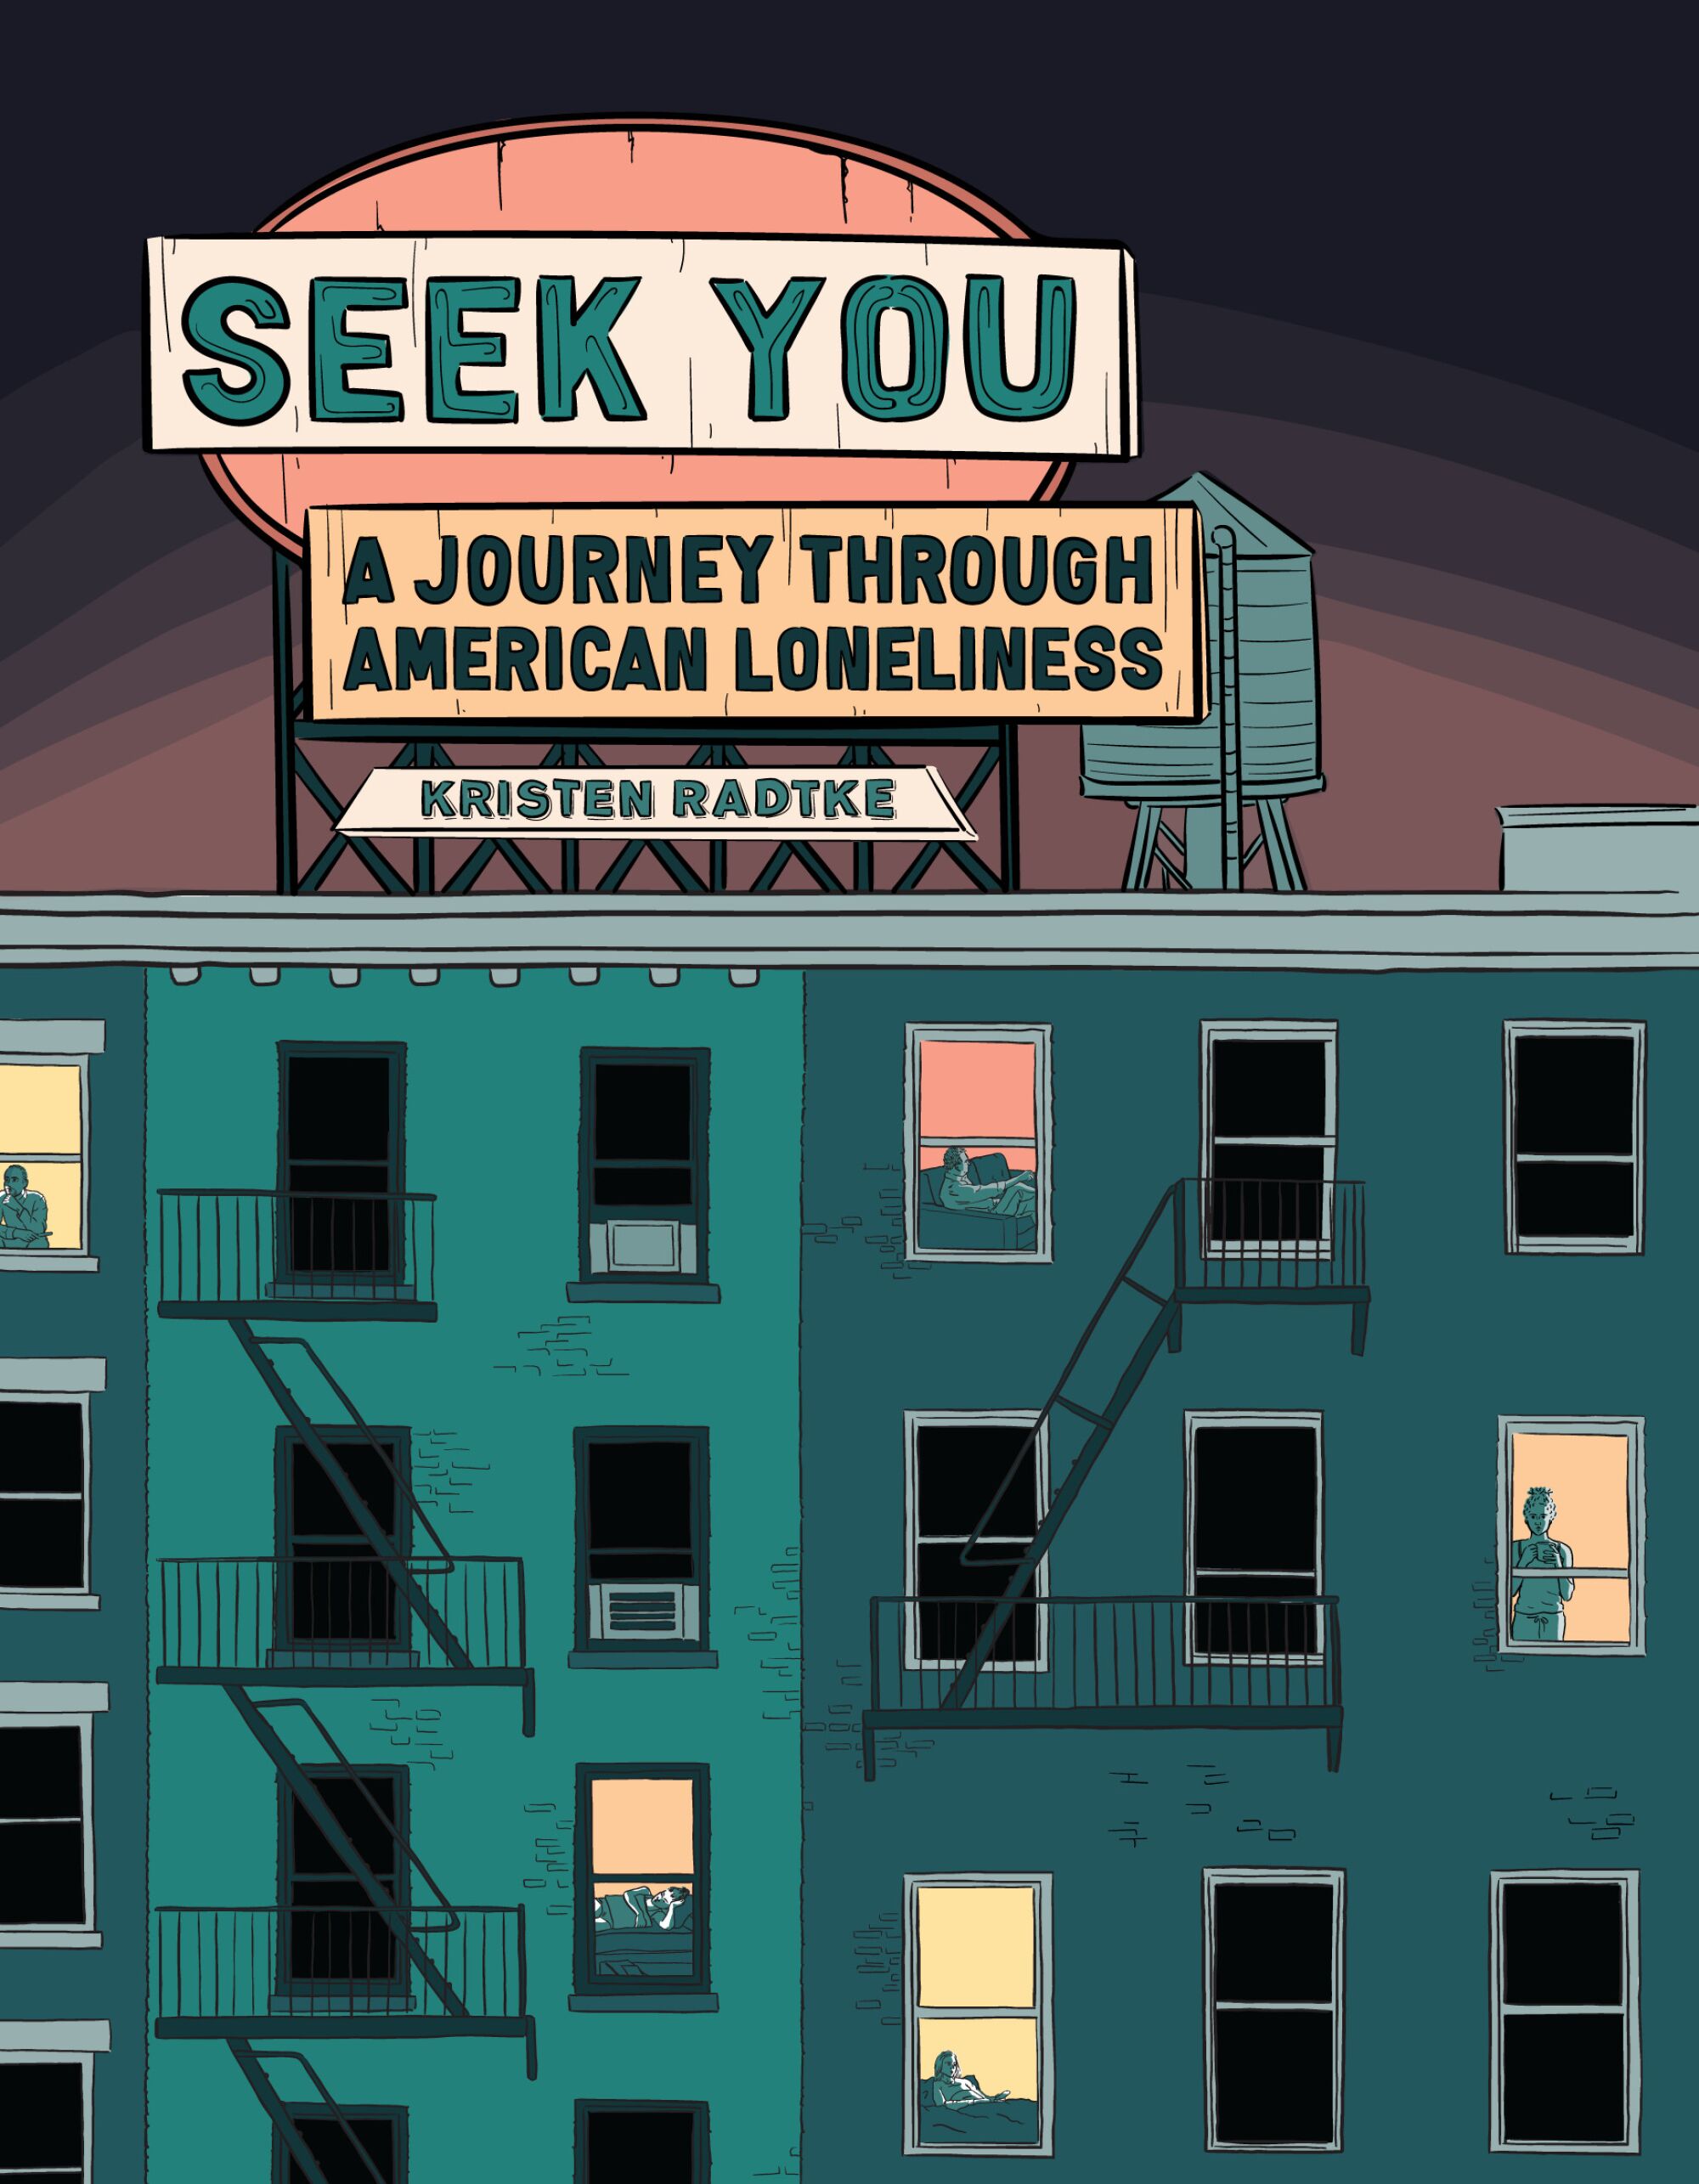 A drawing of the exterior of an apartment building on the cover of "Seek You," by Kristen Radtke.